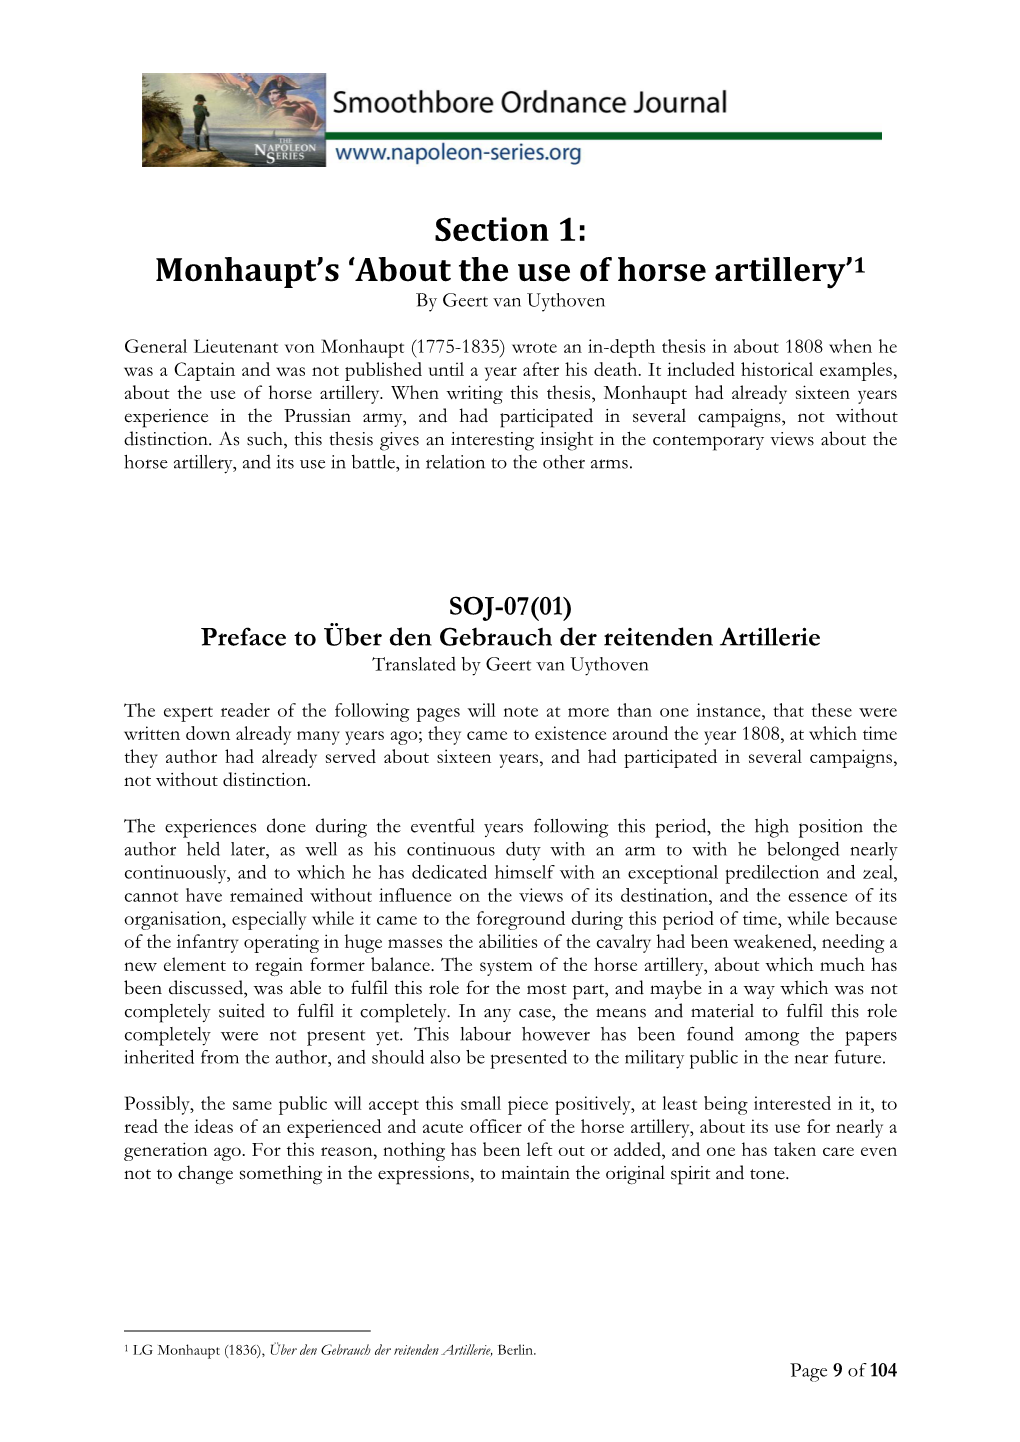 Monhaupt's 'About the Use of Horse Artillery'